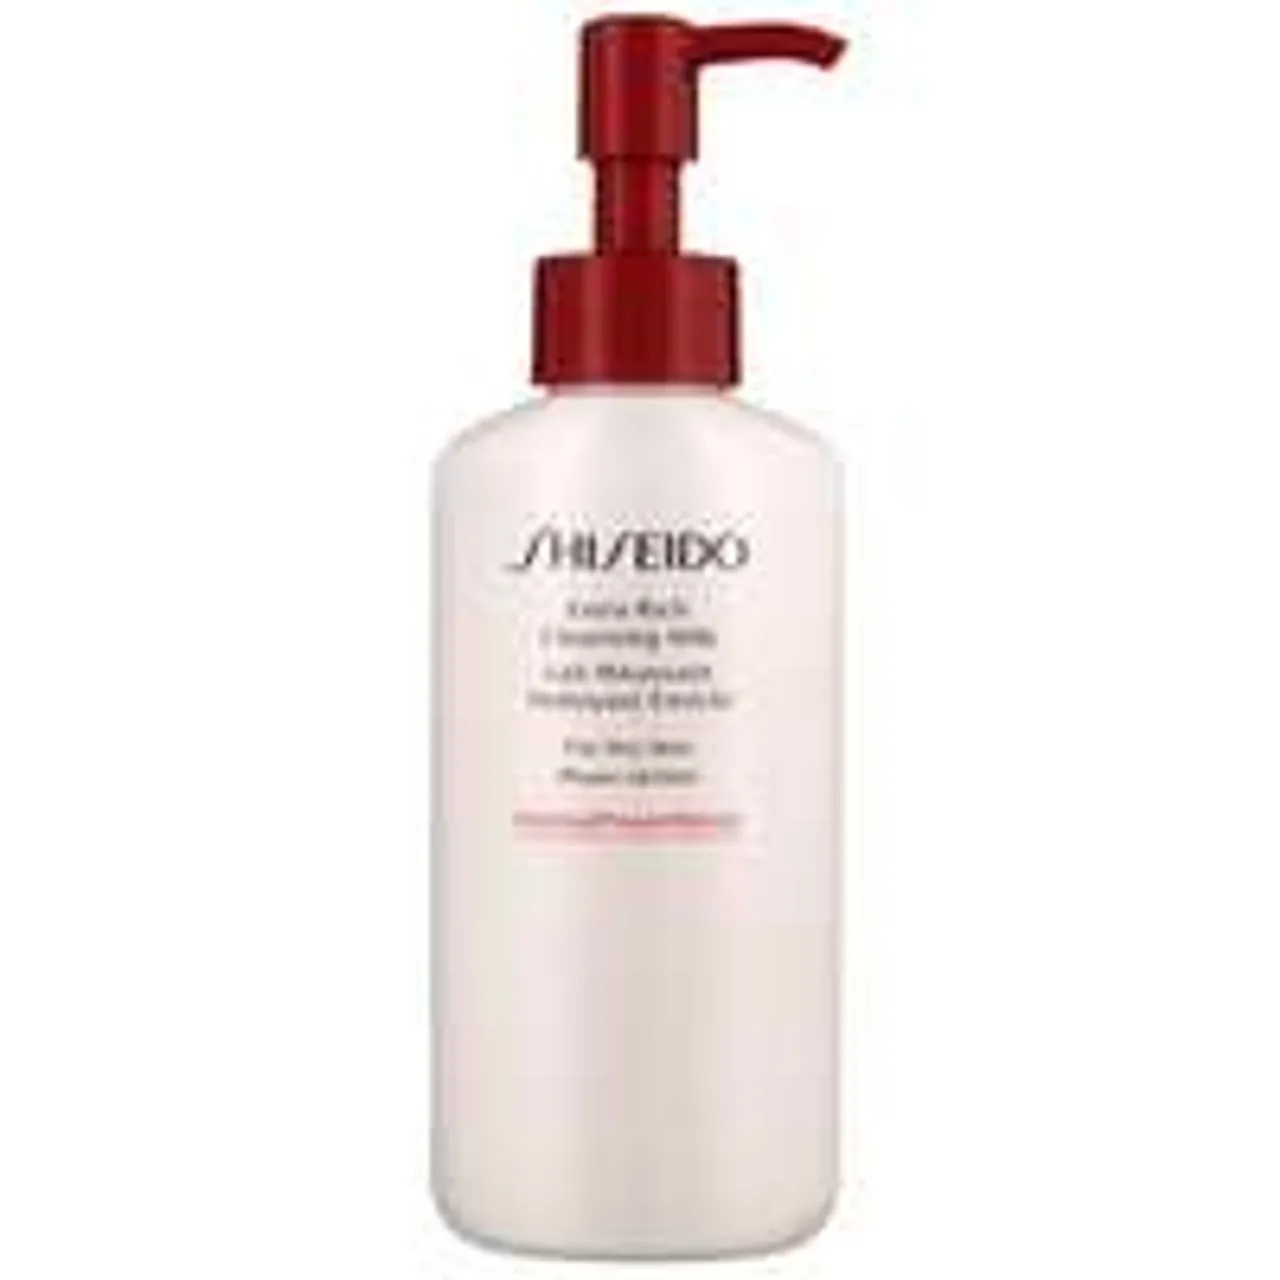 Shiseido Cleansers and Makeup Removers Extra Rich Cleansing Milk for Dry Skin 125ml / 4.2 fl.oz.